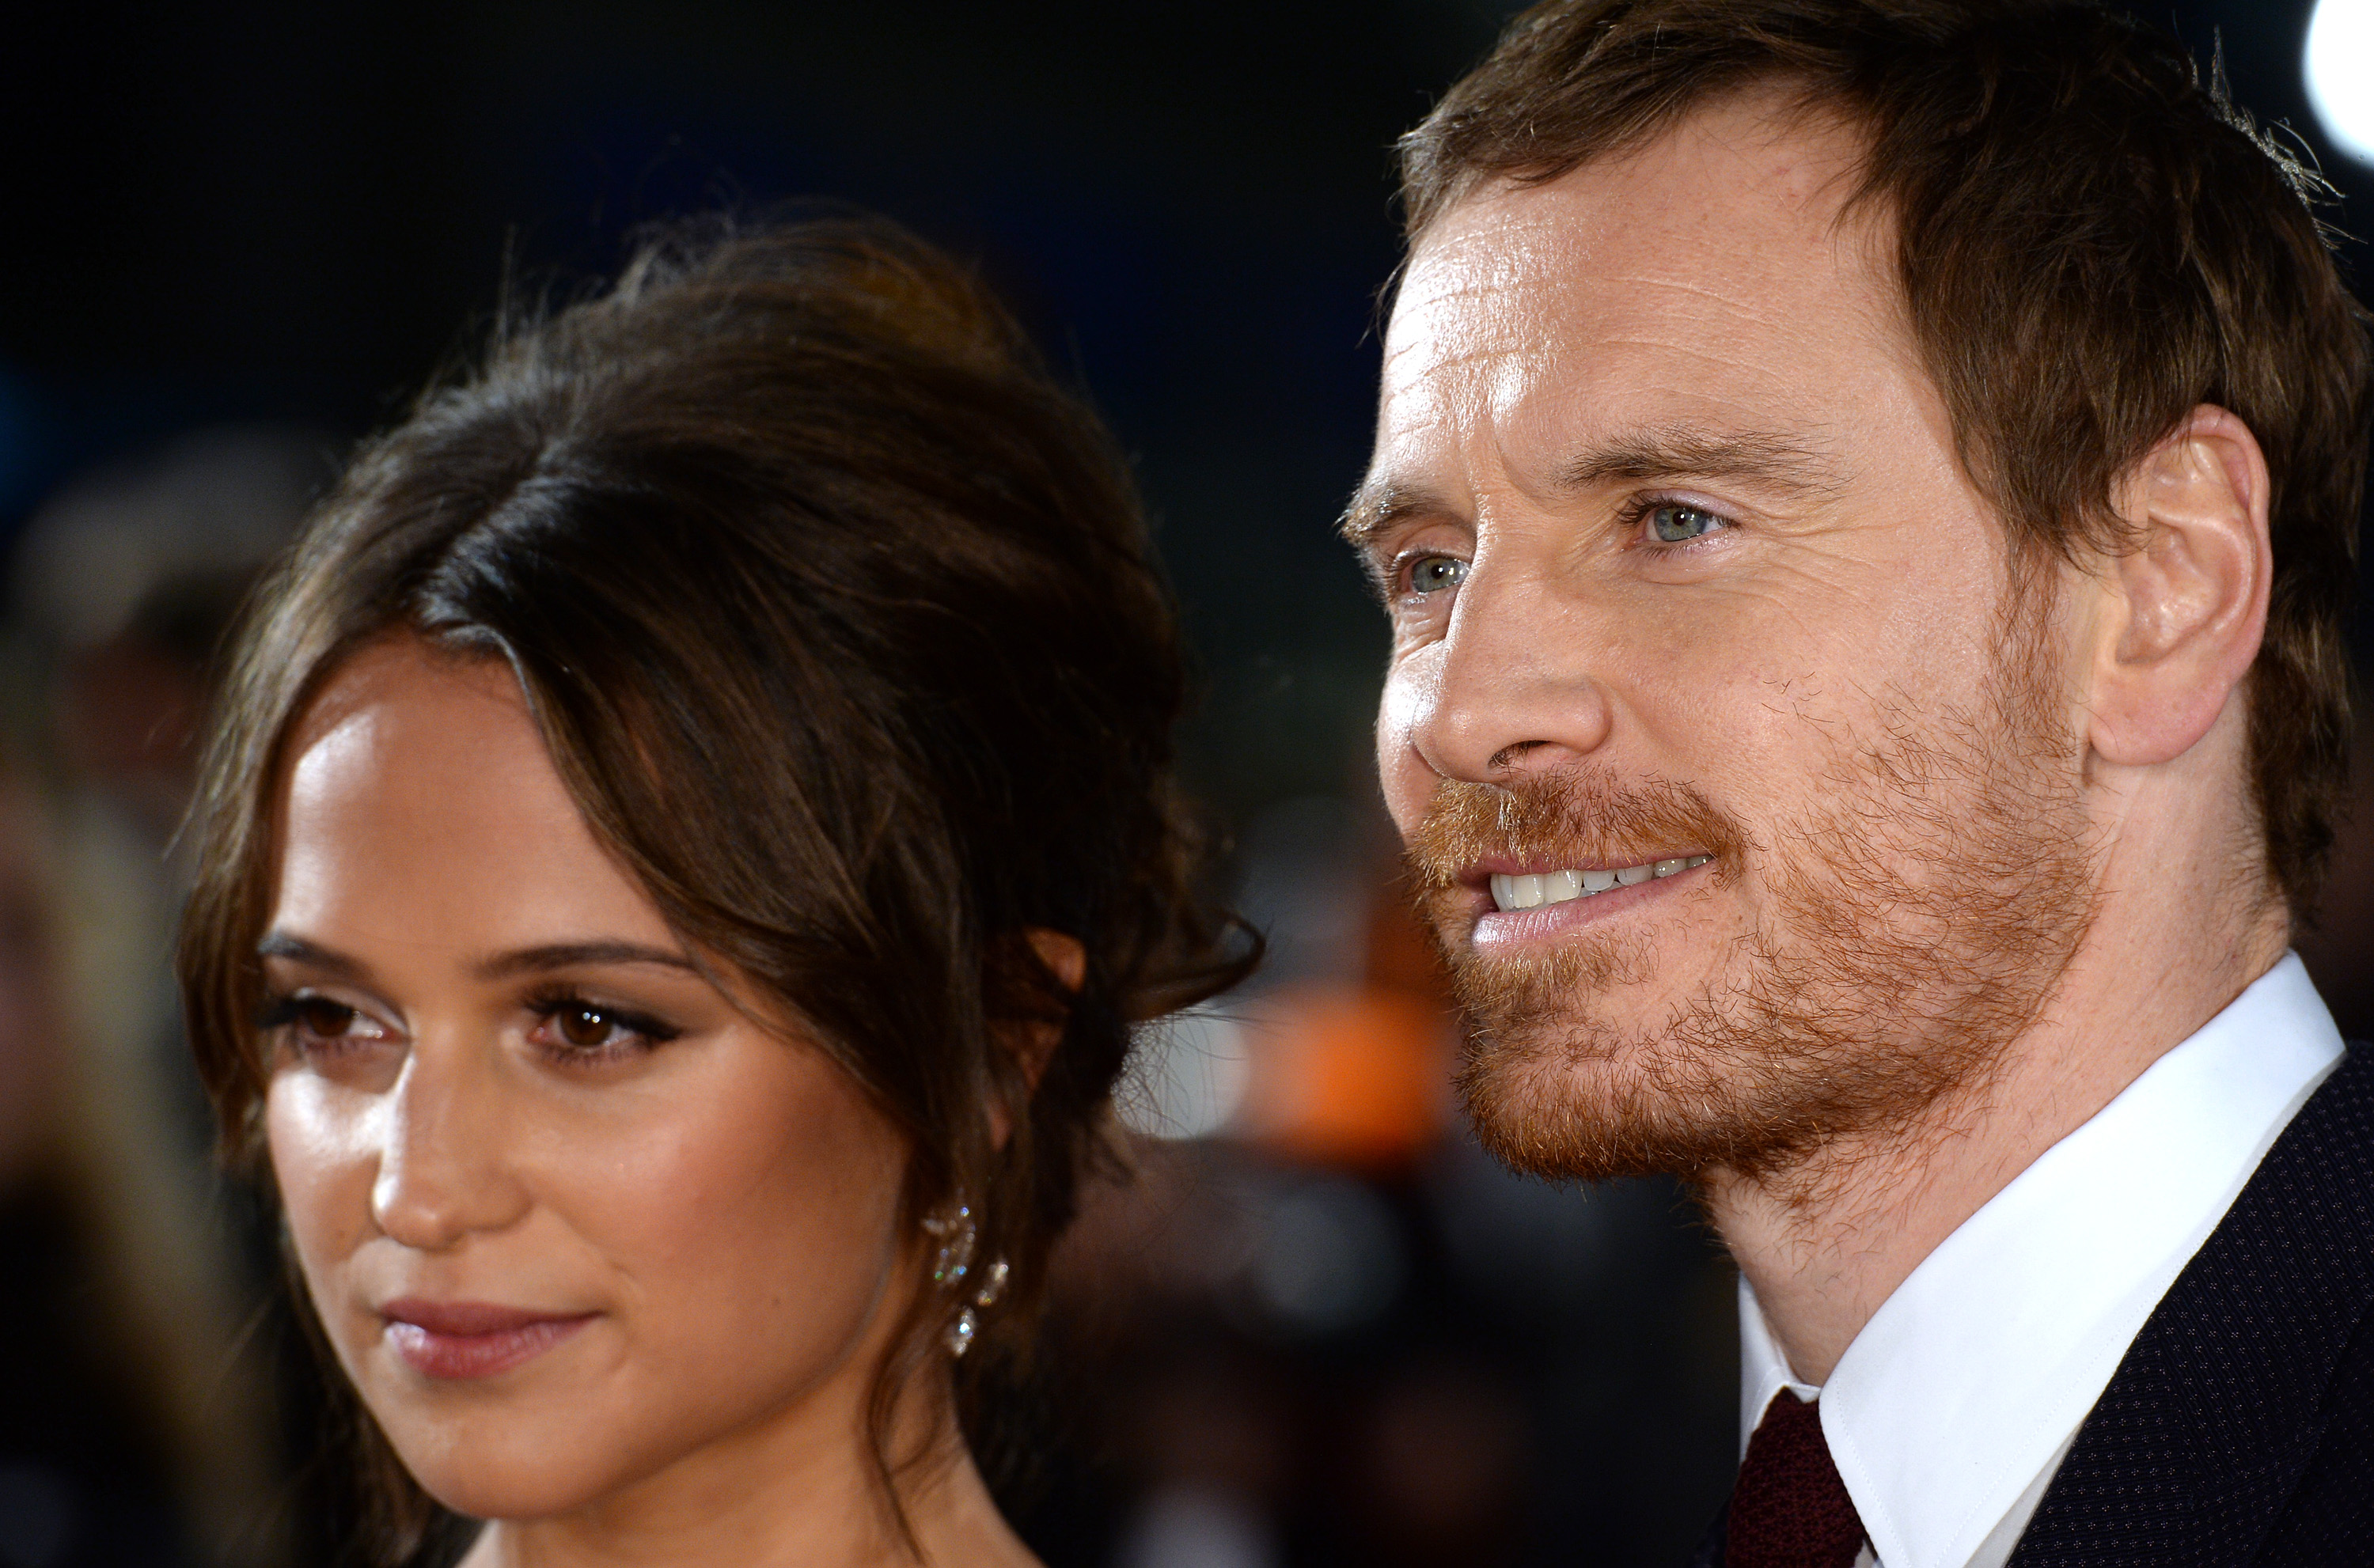 Michael Fassbender and Alicia Vikander arrive for the UK premiere of 